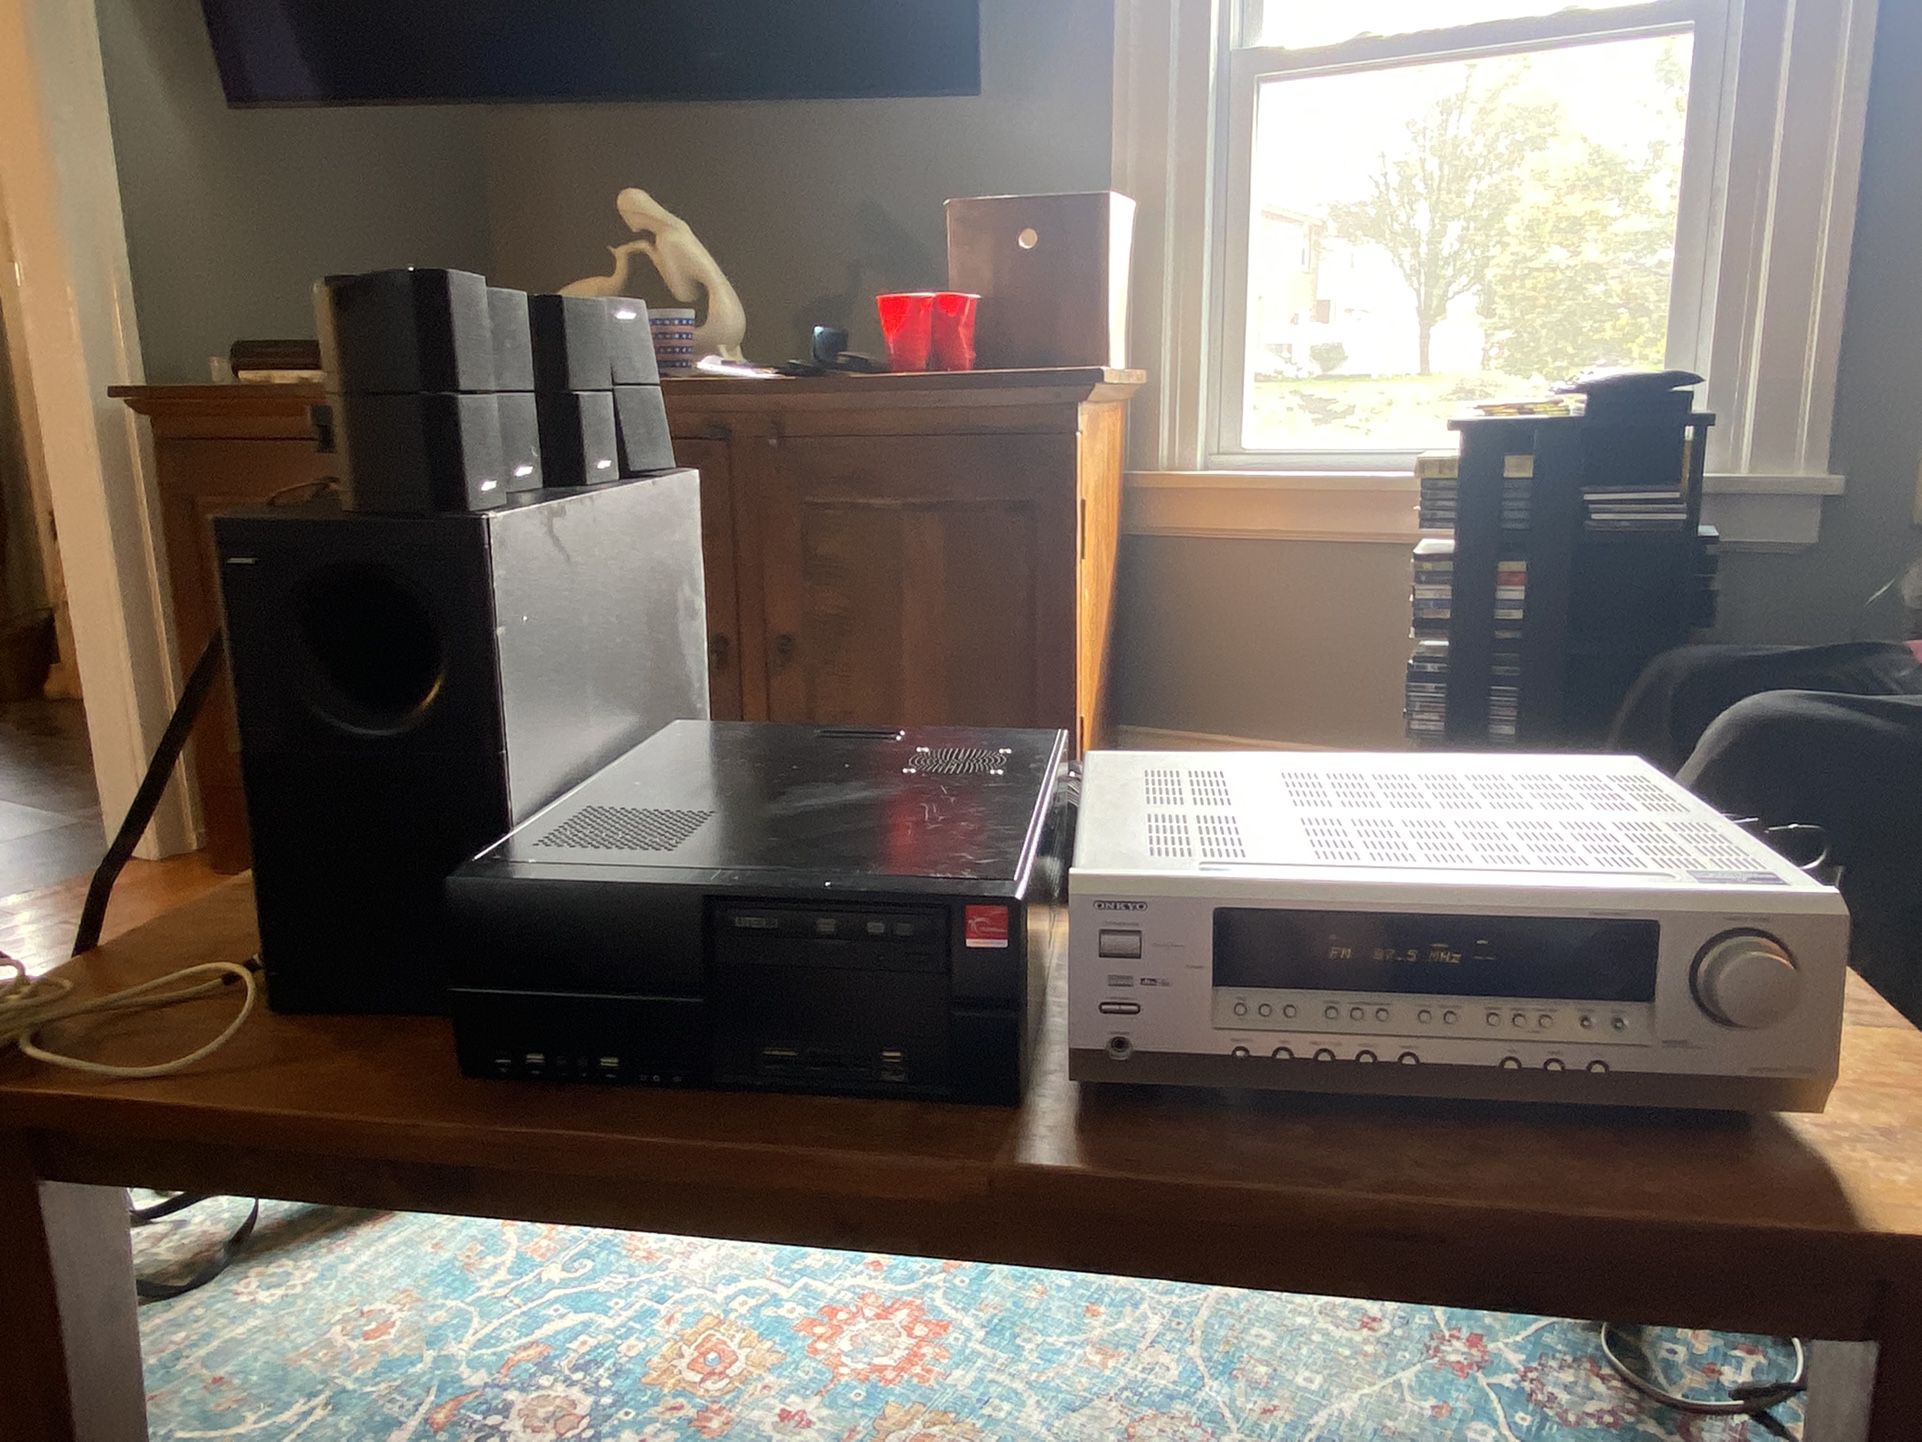 Stereo equipment Bose speakers subwoofer DVD player and CD player